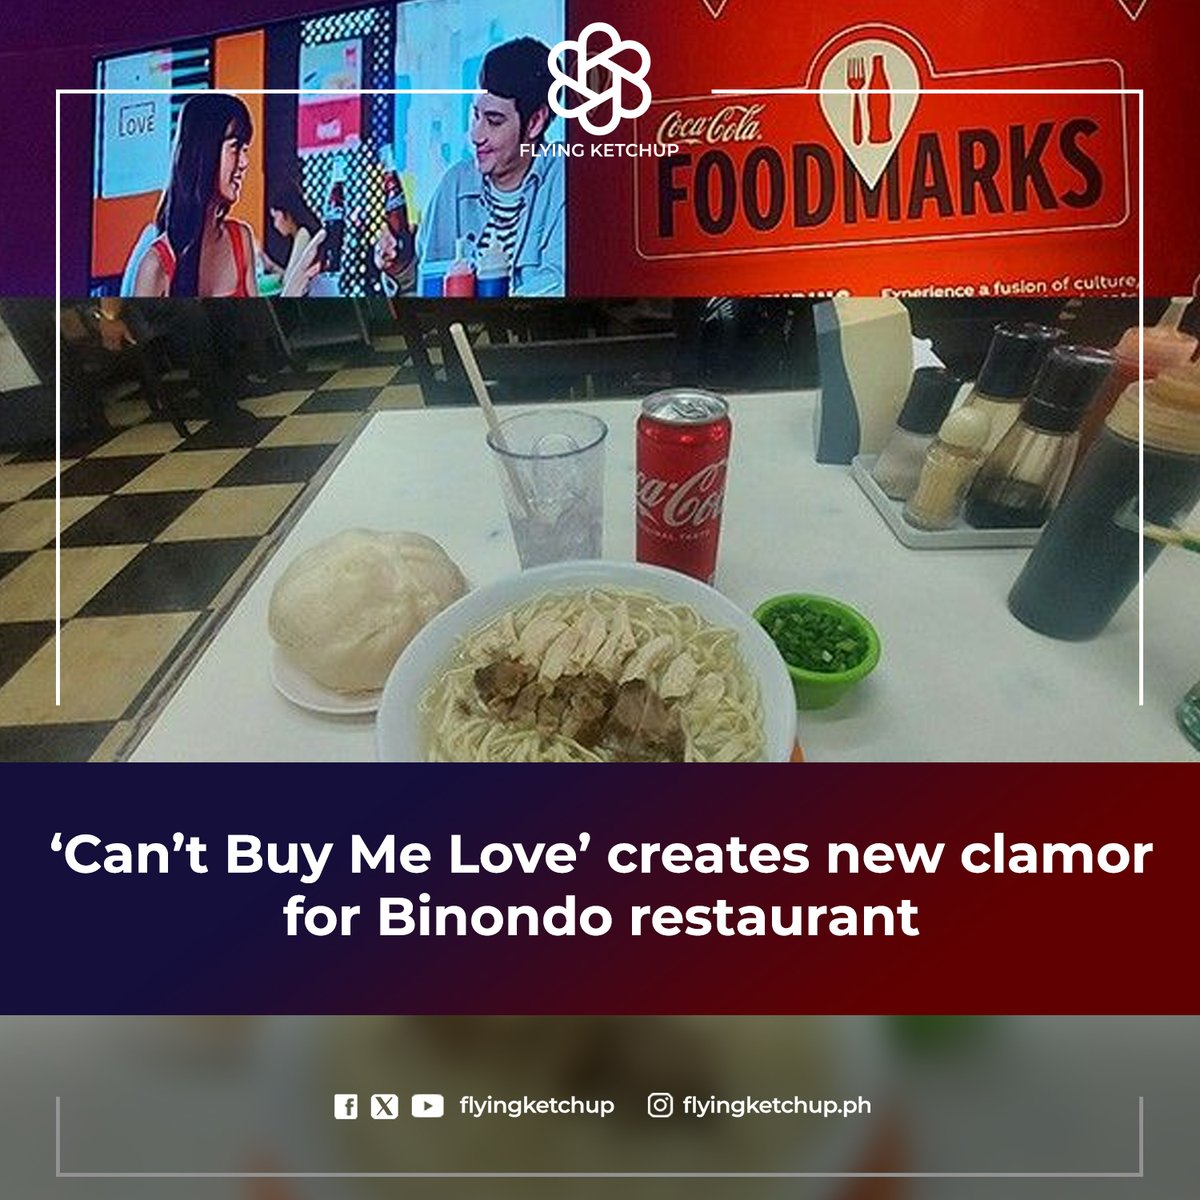 ‘Can’t Buy Me Love’ creates new clamor for Binondo restaurant!

READ MORE: is.gd/REbb1U

#FlyingKetchup